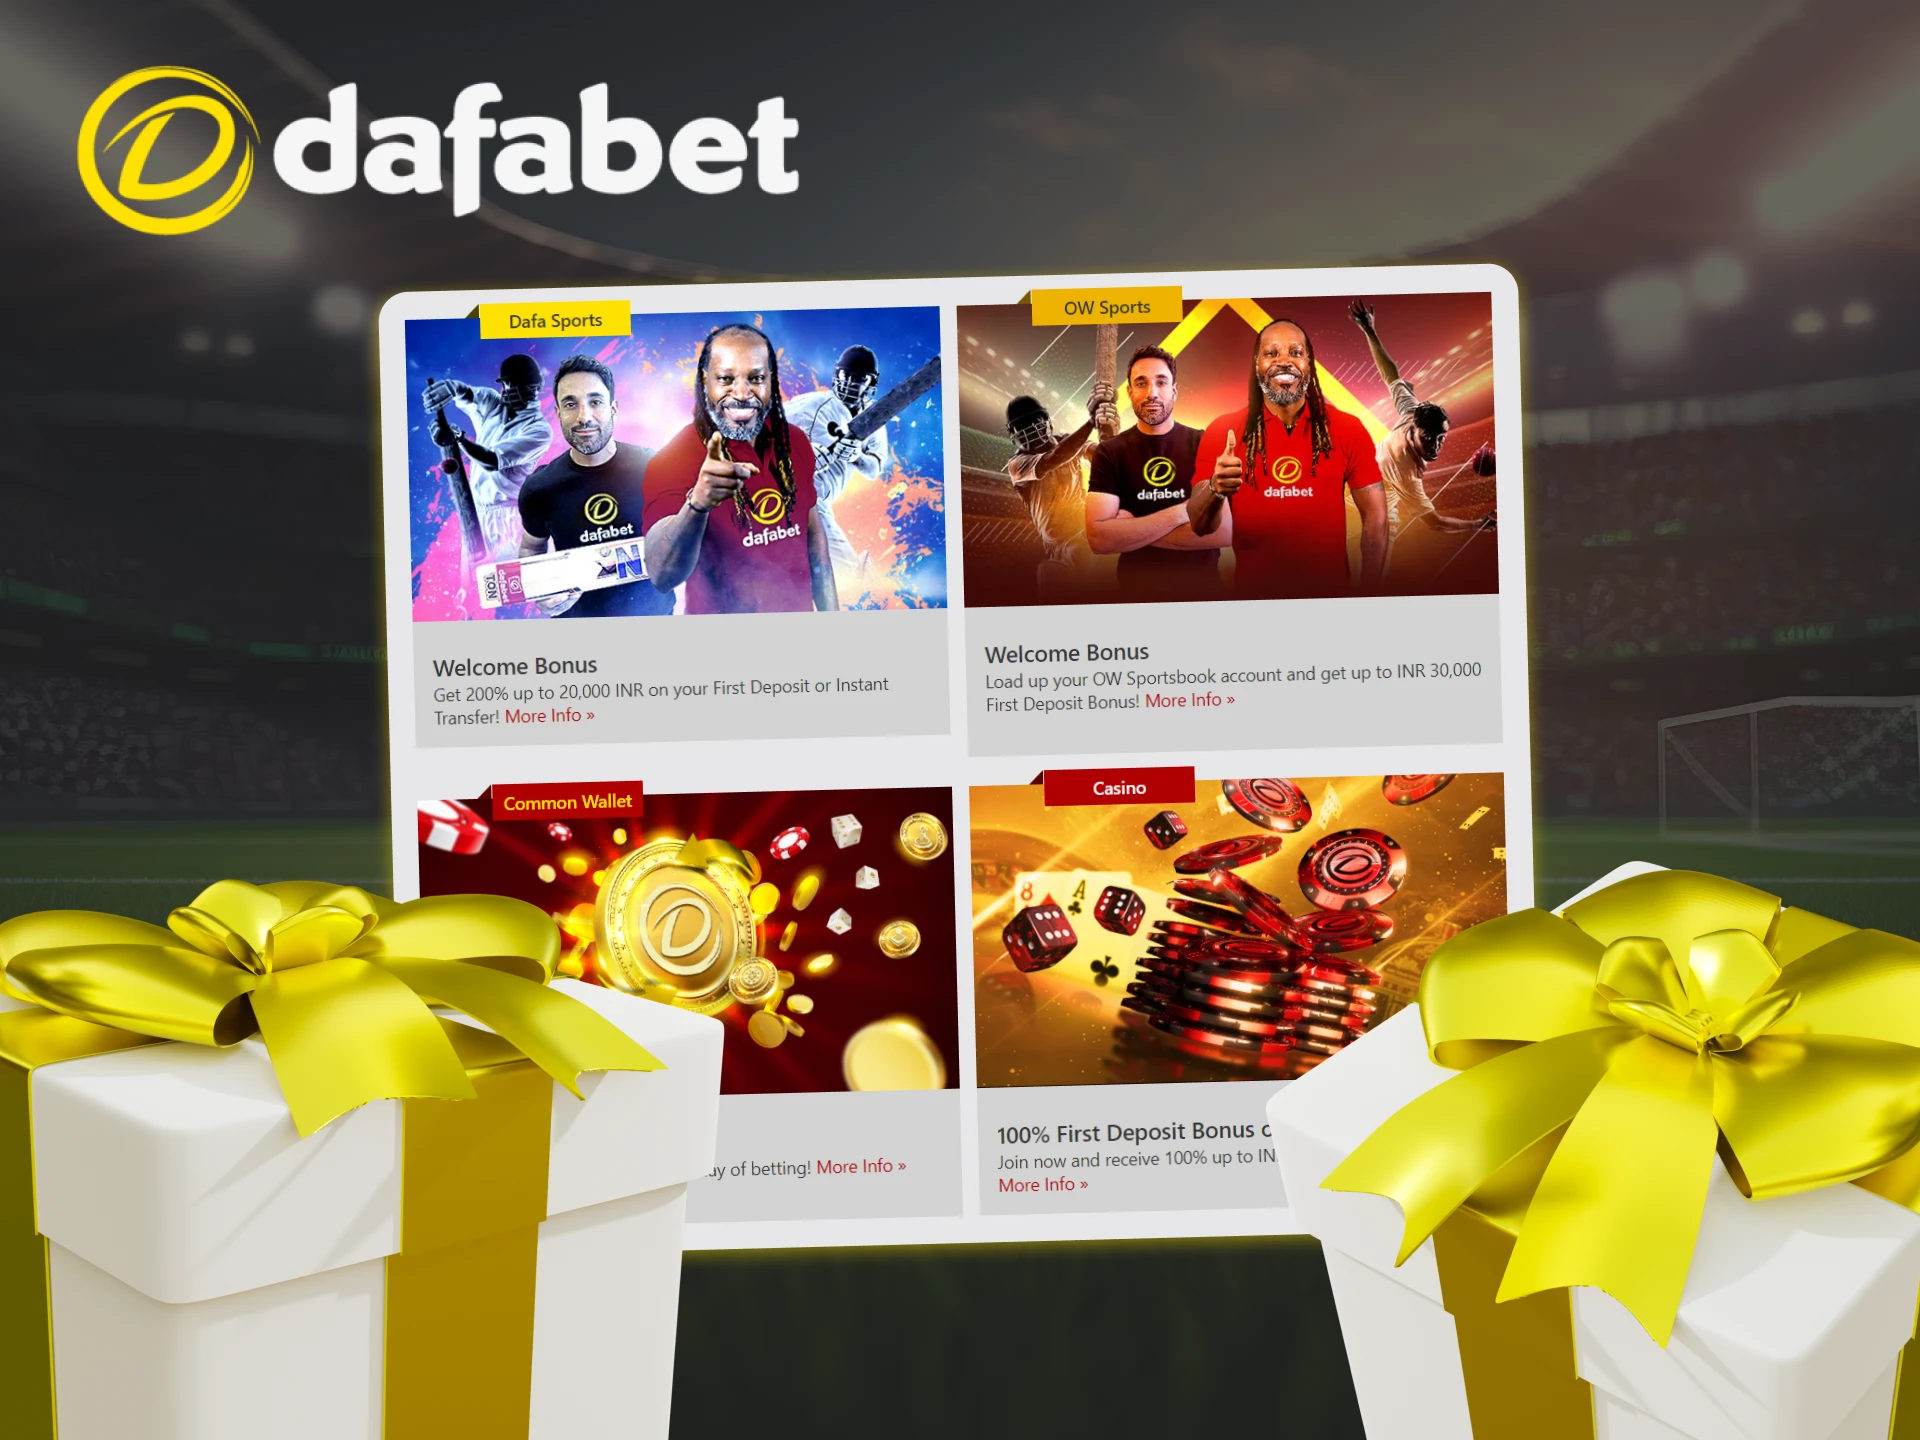 Dafabet offers many different sports and casino bonuses, register to use them.